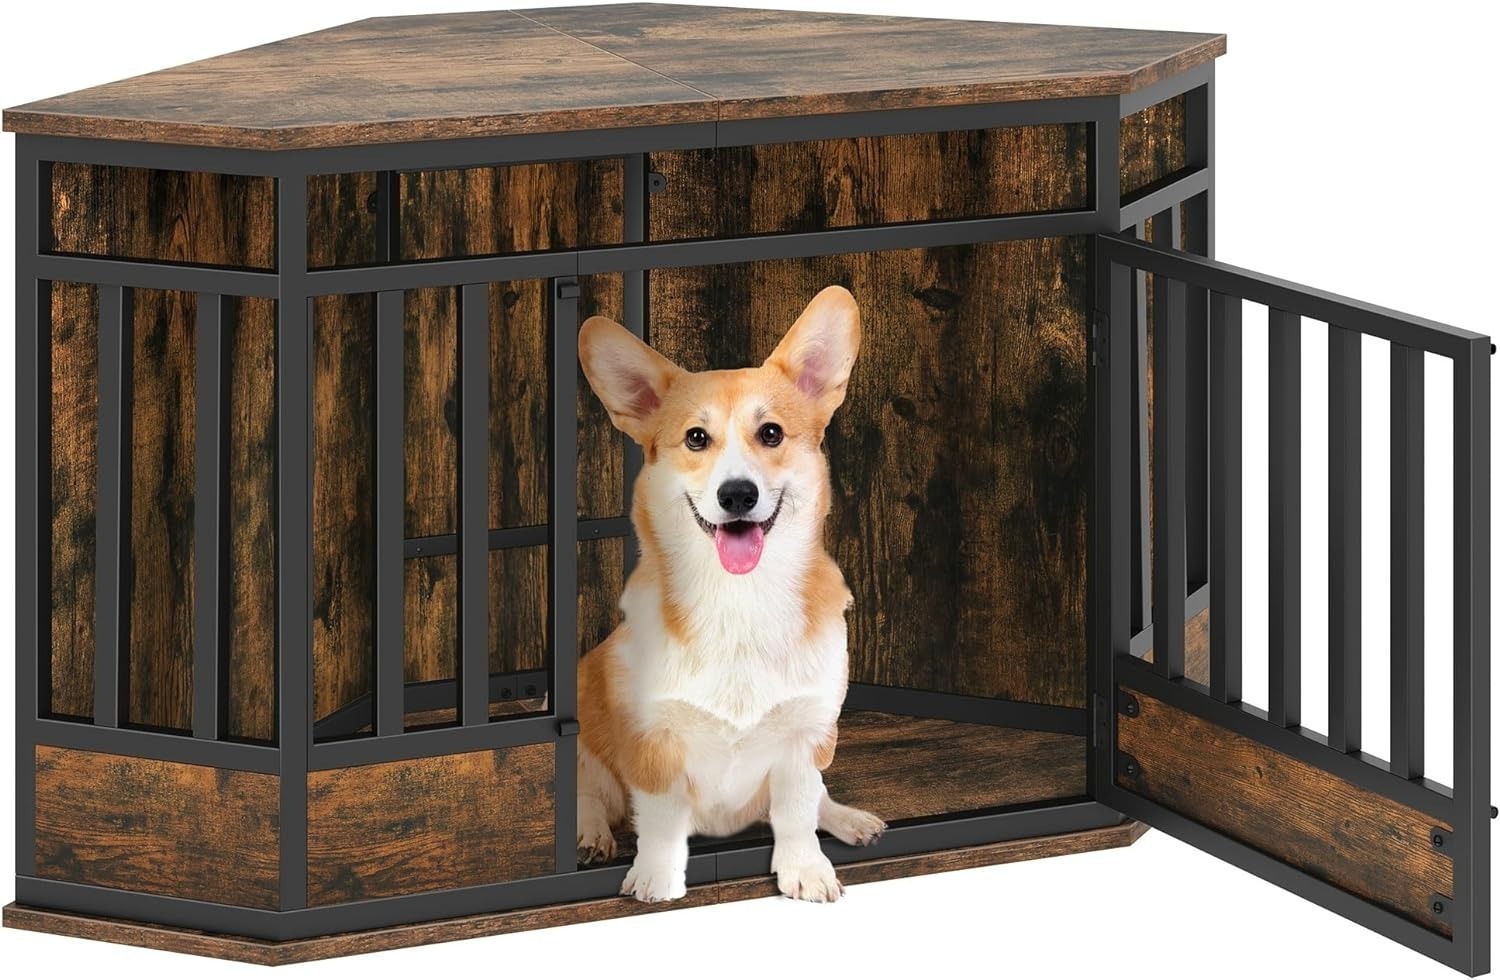 DWVO 44" Heavy Duty Indoor Croner End Table Dog Crate for Large Dogs $140 + Free Shipping